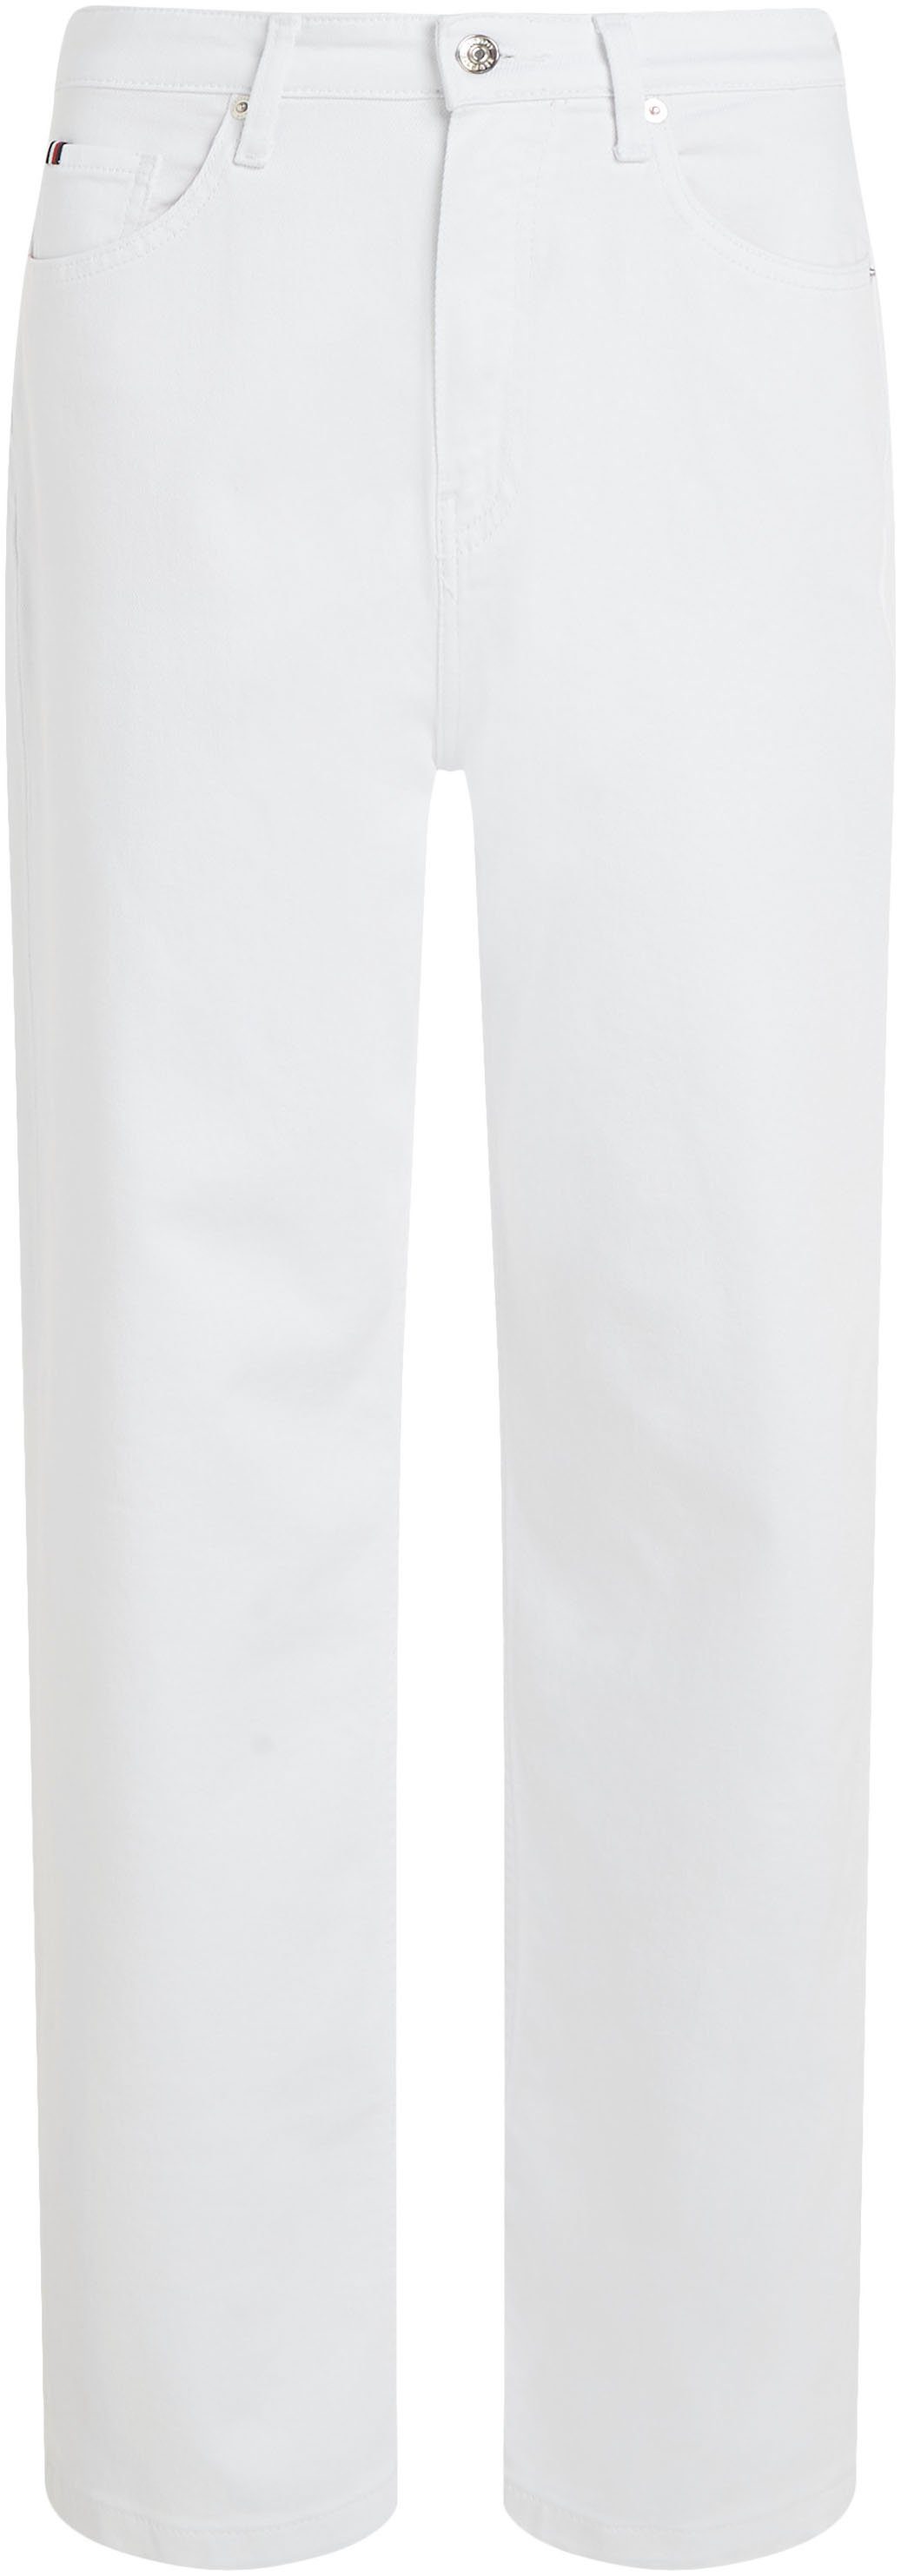 STRAIGHT Optic HW Hilfiger Waschung RELAXED Tommy PAM in white weißer Relax-fit-Jeans